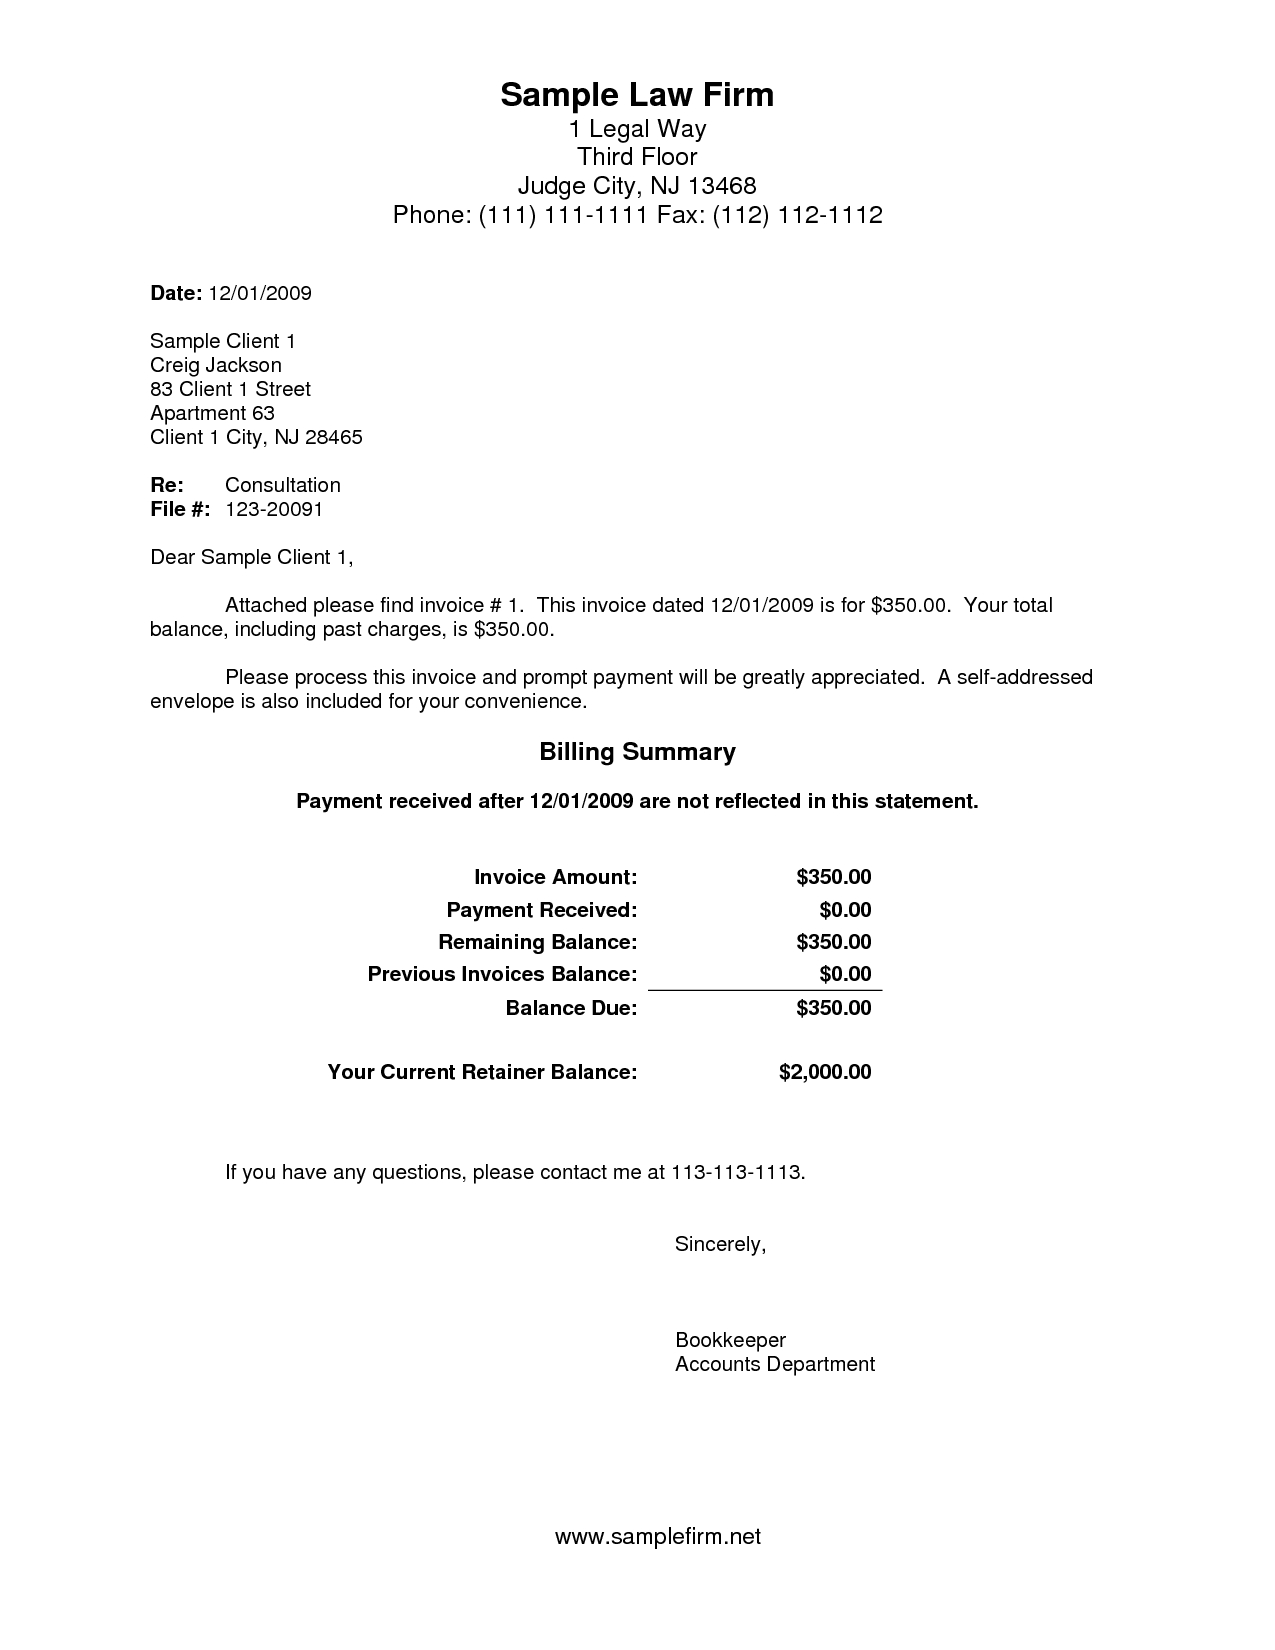 doc432560 sample invoice for services free service invoice sample invoice for services rendered template